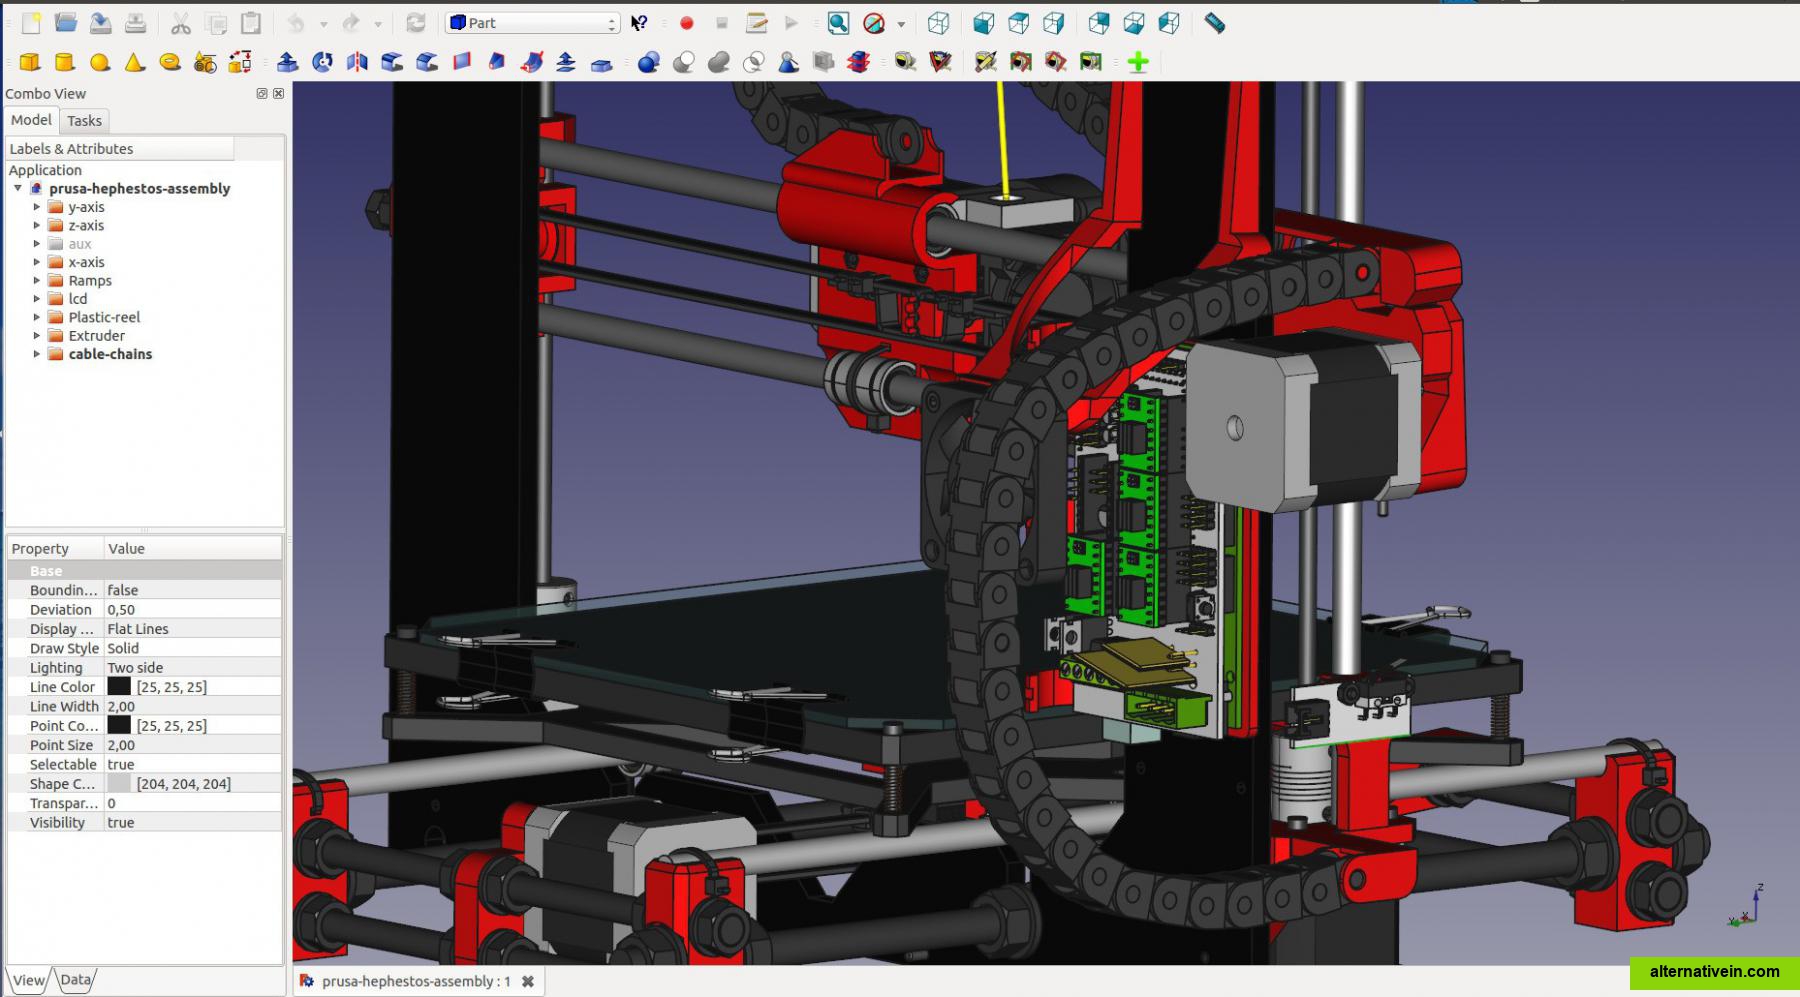 download the last version for windows FreeCAD 0.21.0